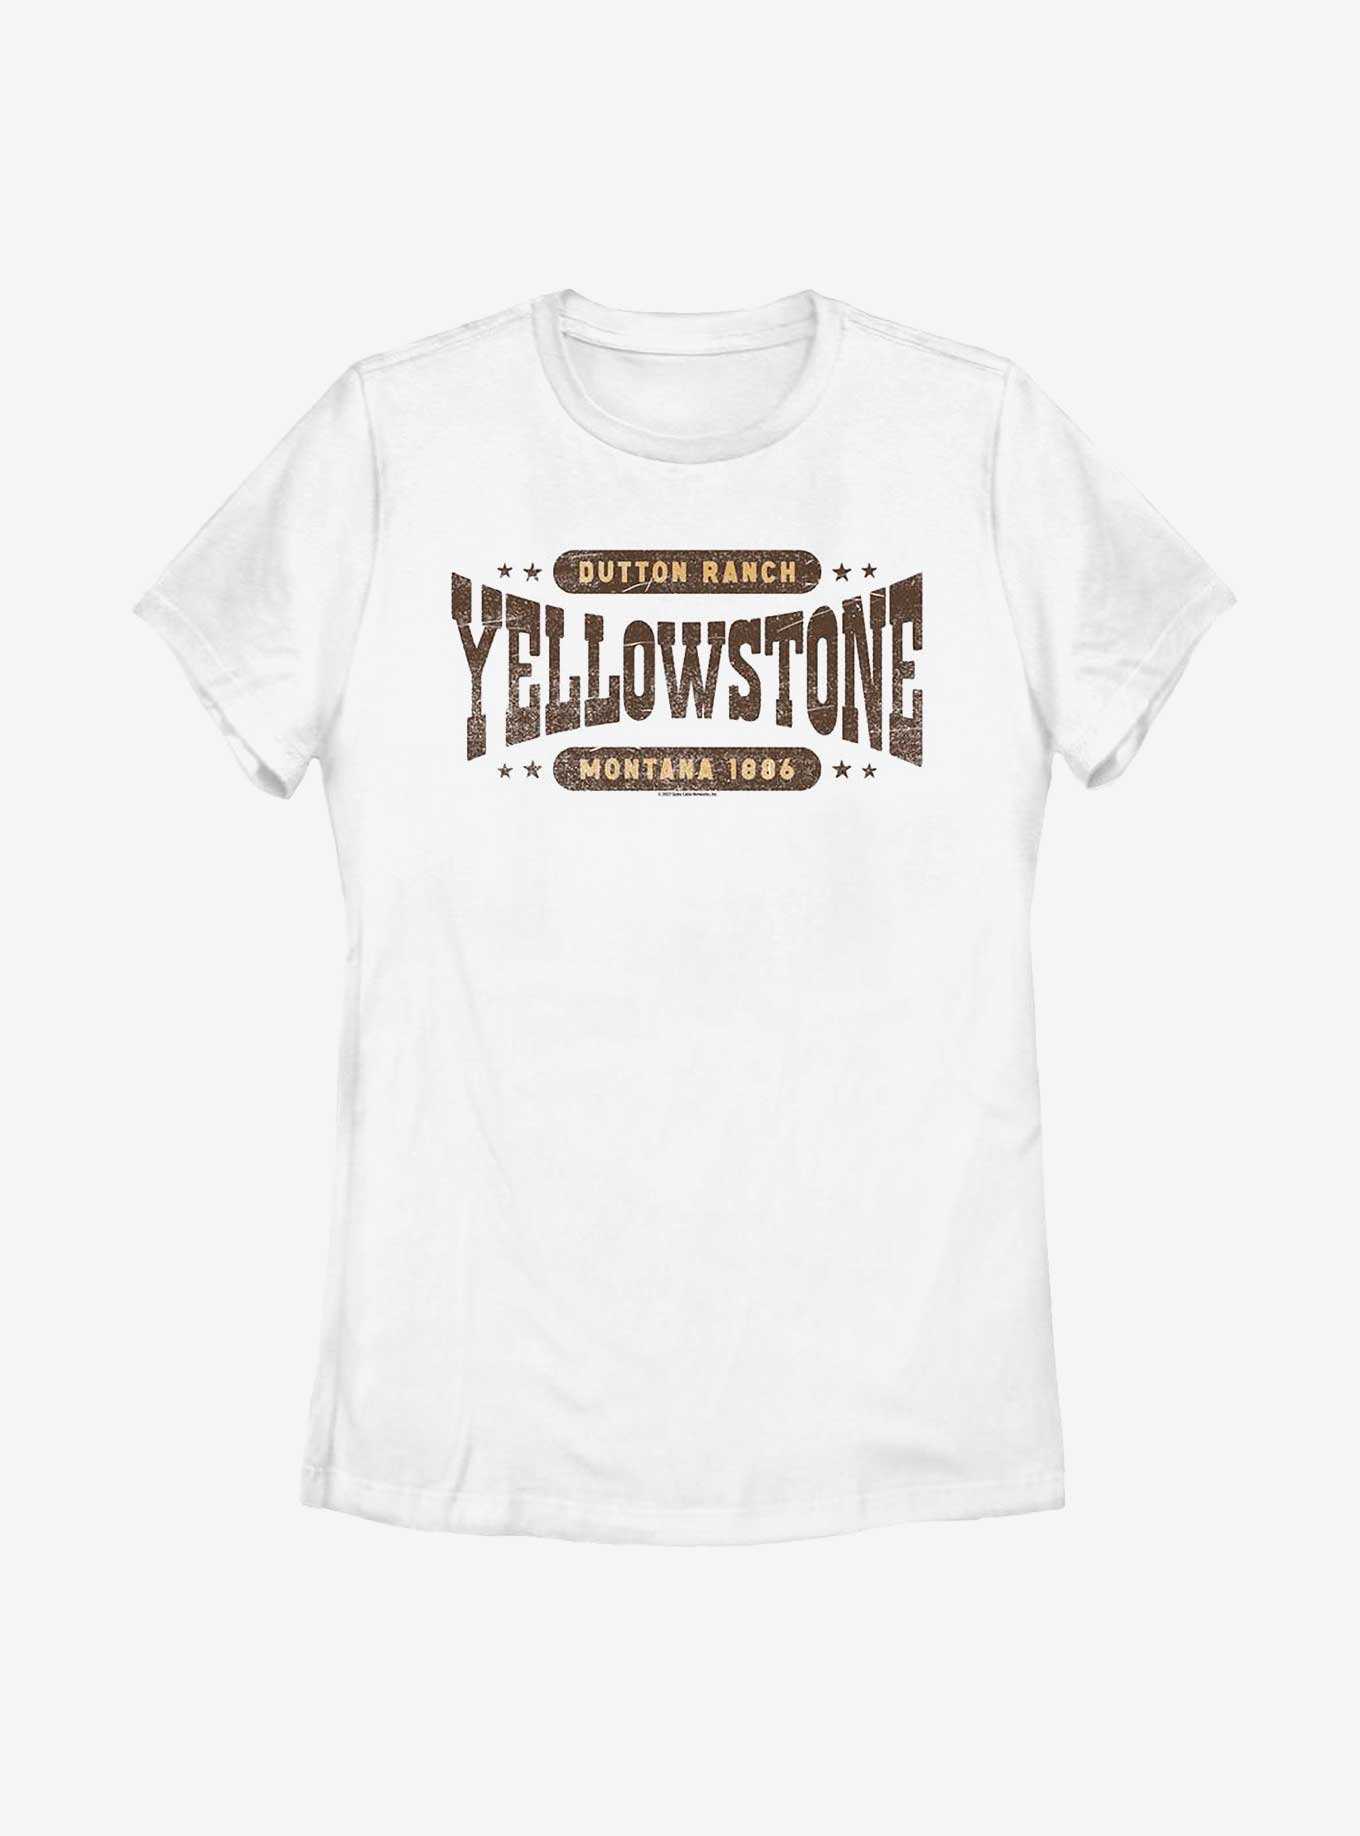 Yellowstone We Dont Share Womens T-Shirt, , hi-res